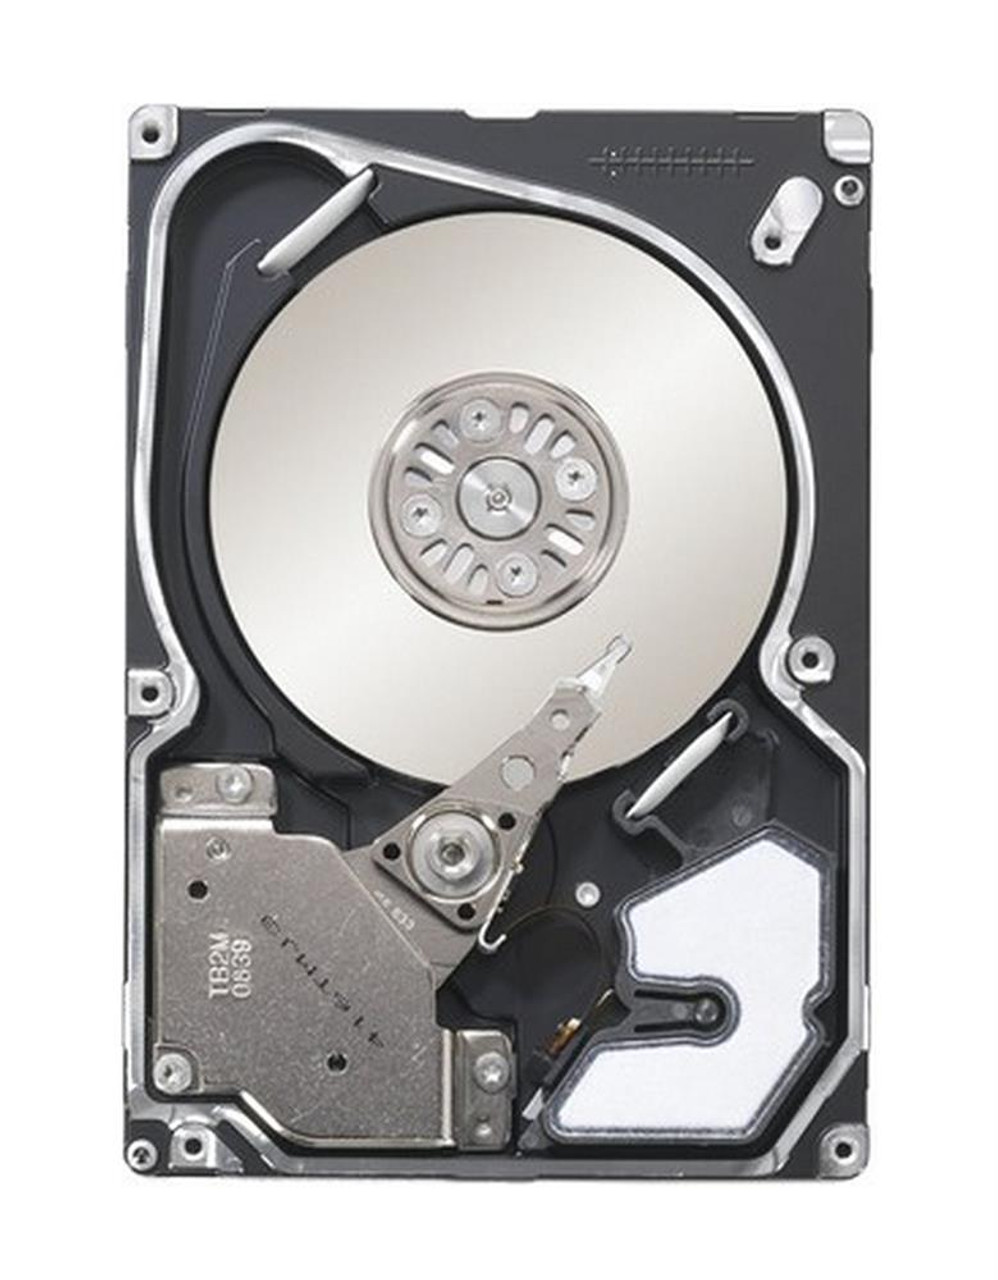 9SW066-088 - Seagate 300GB 15000RPM SAS 6.0Gbps 64MB Cache 2.5-inch Hard Drive